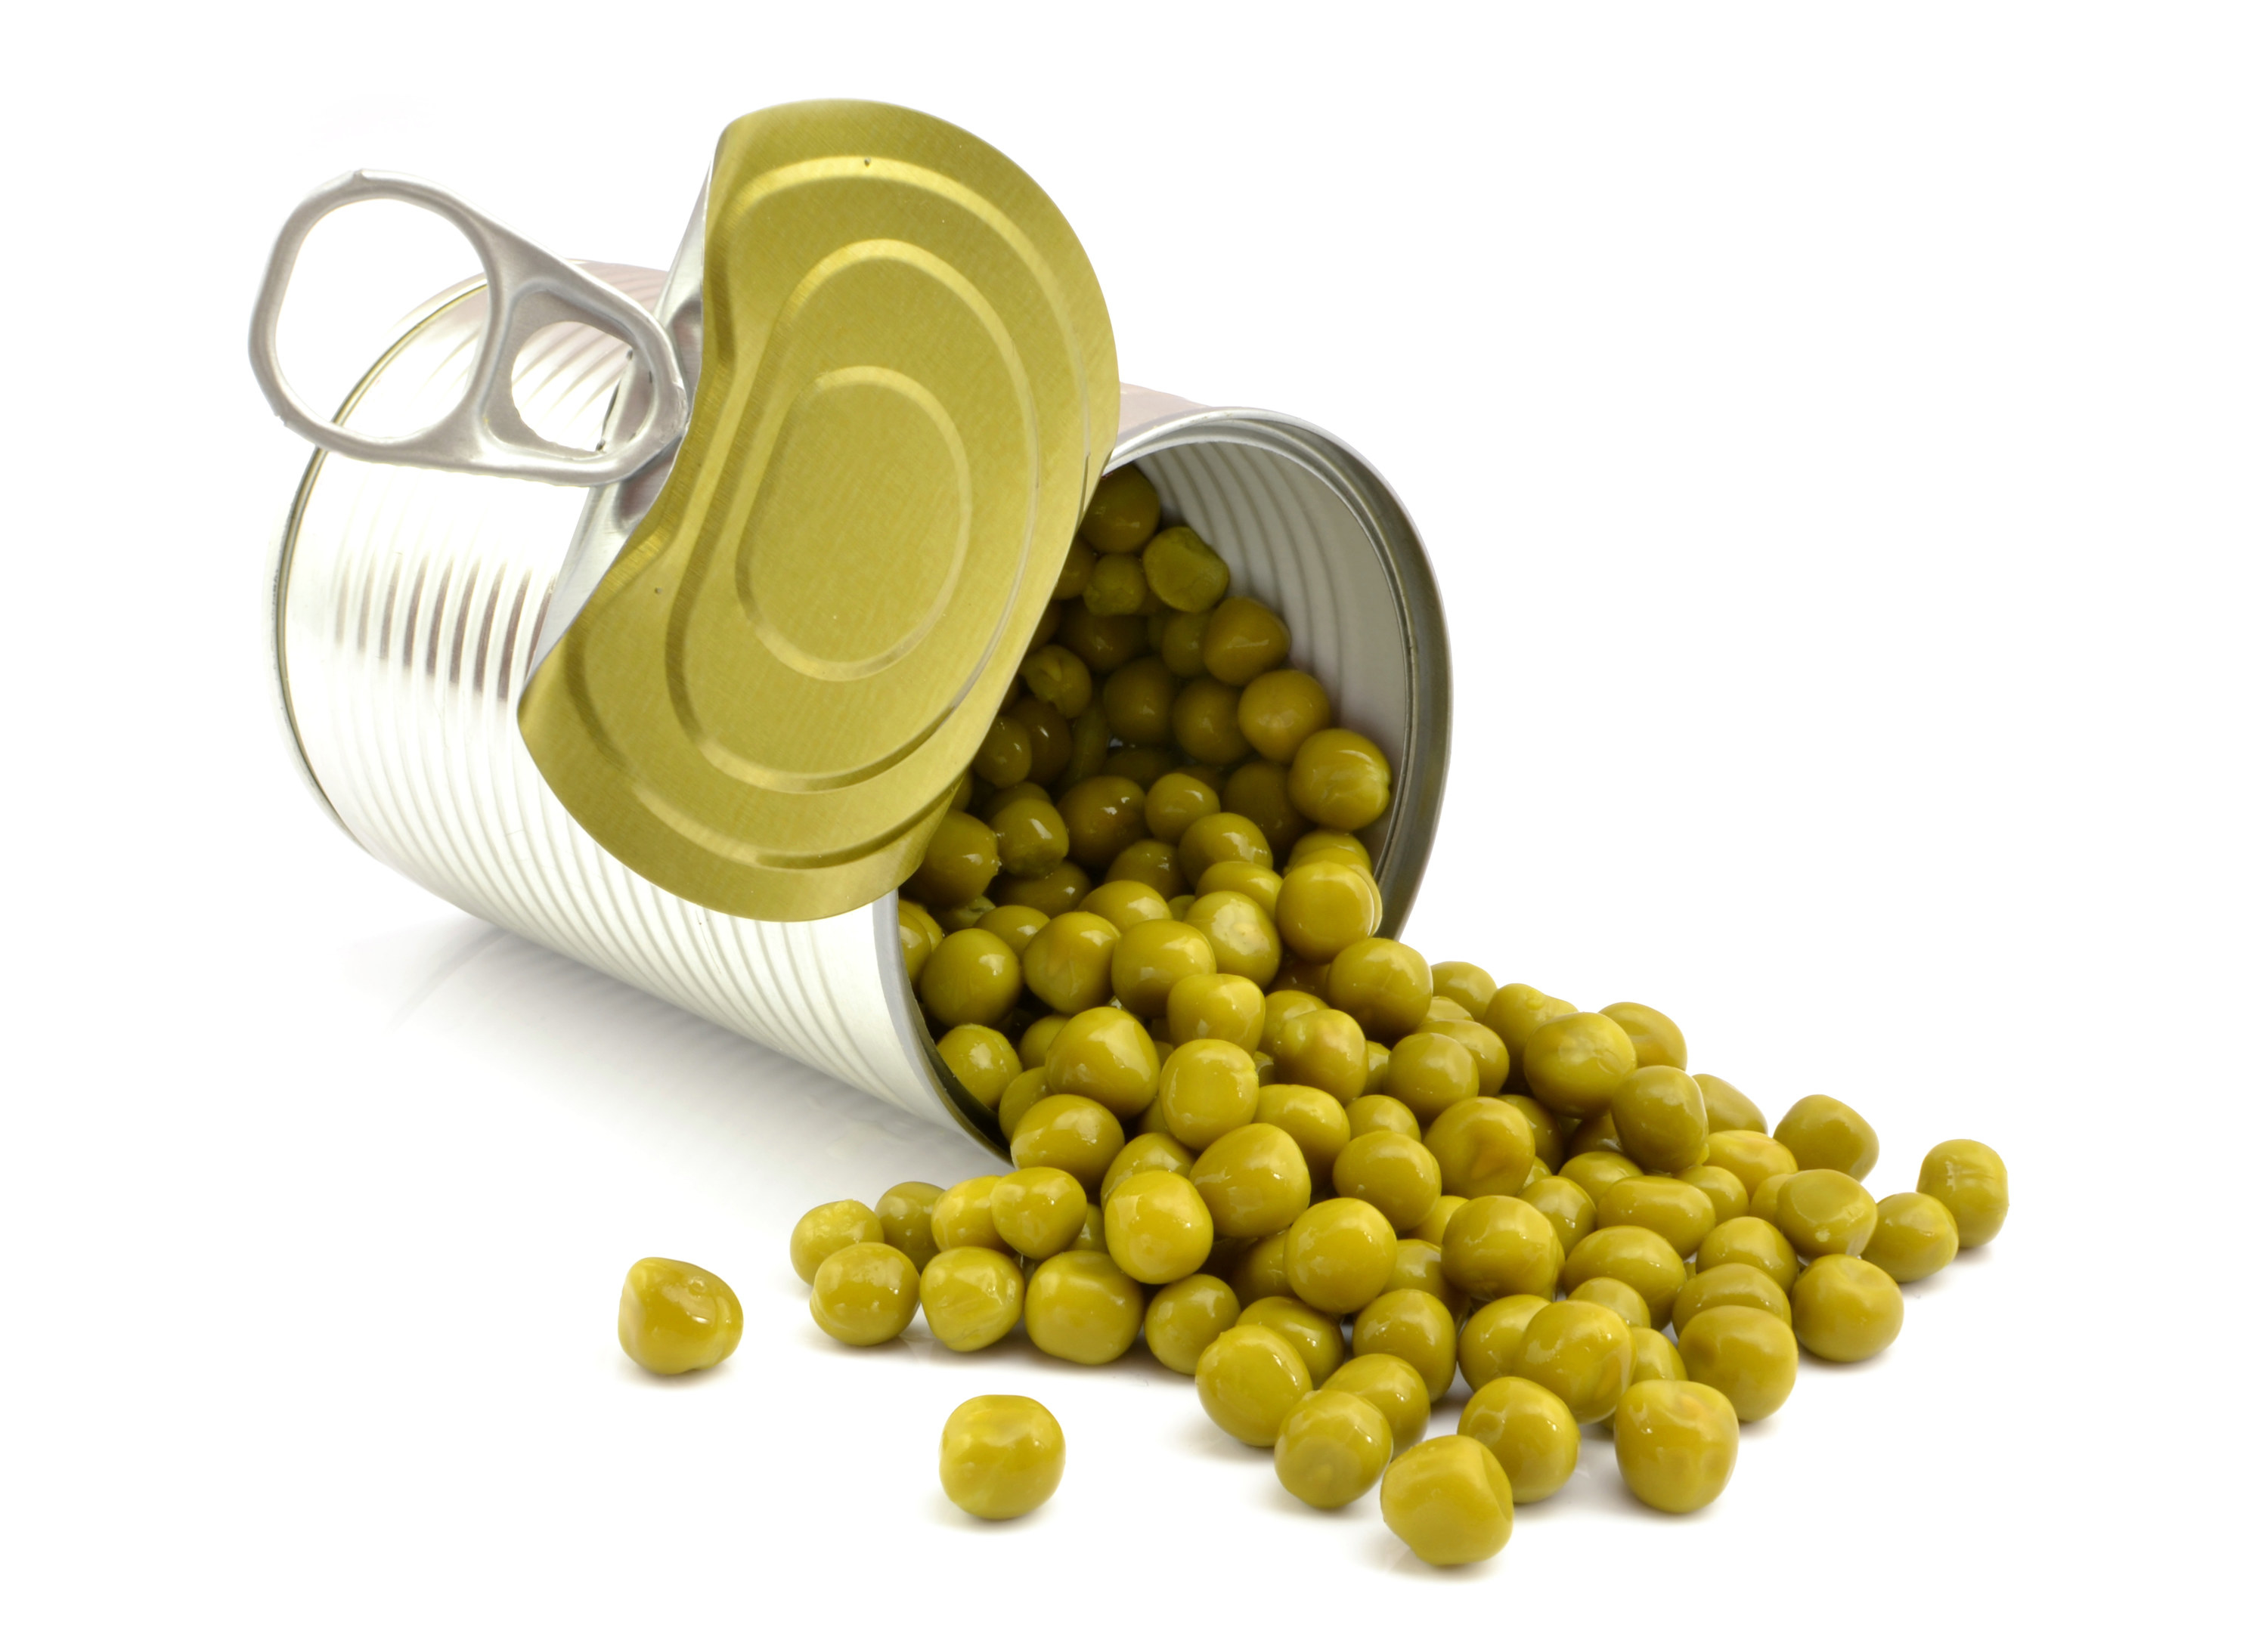 Peas spilling out of a can